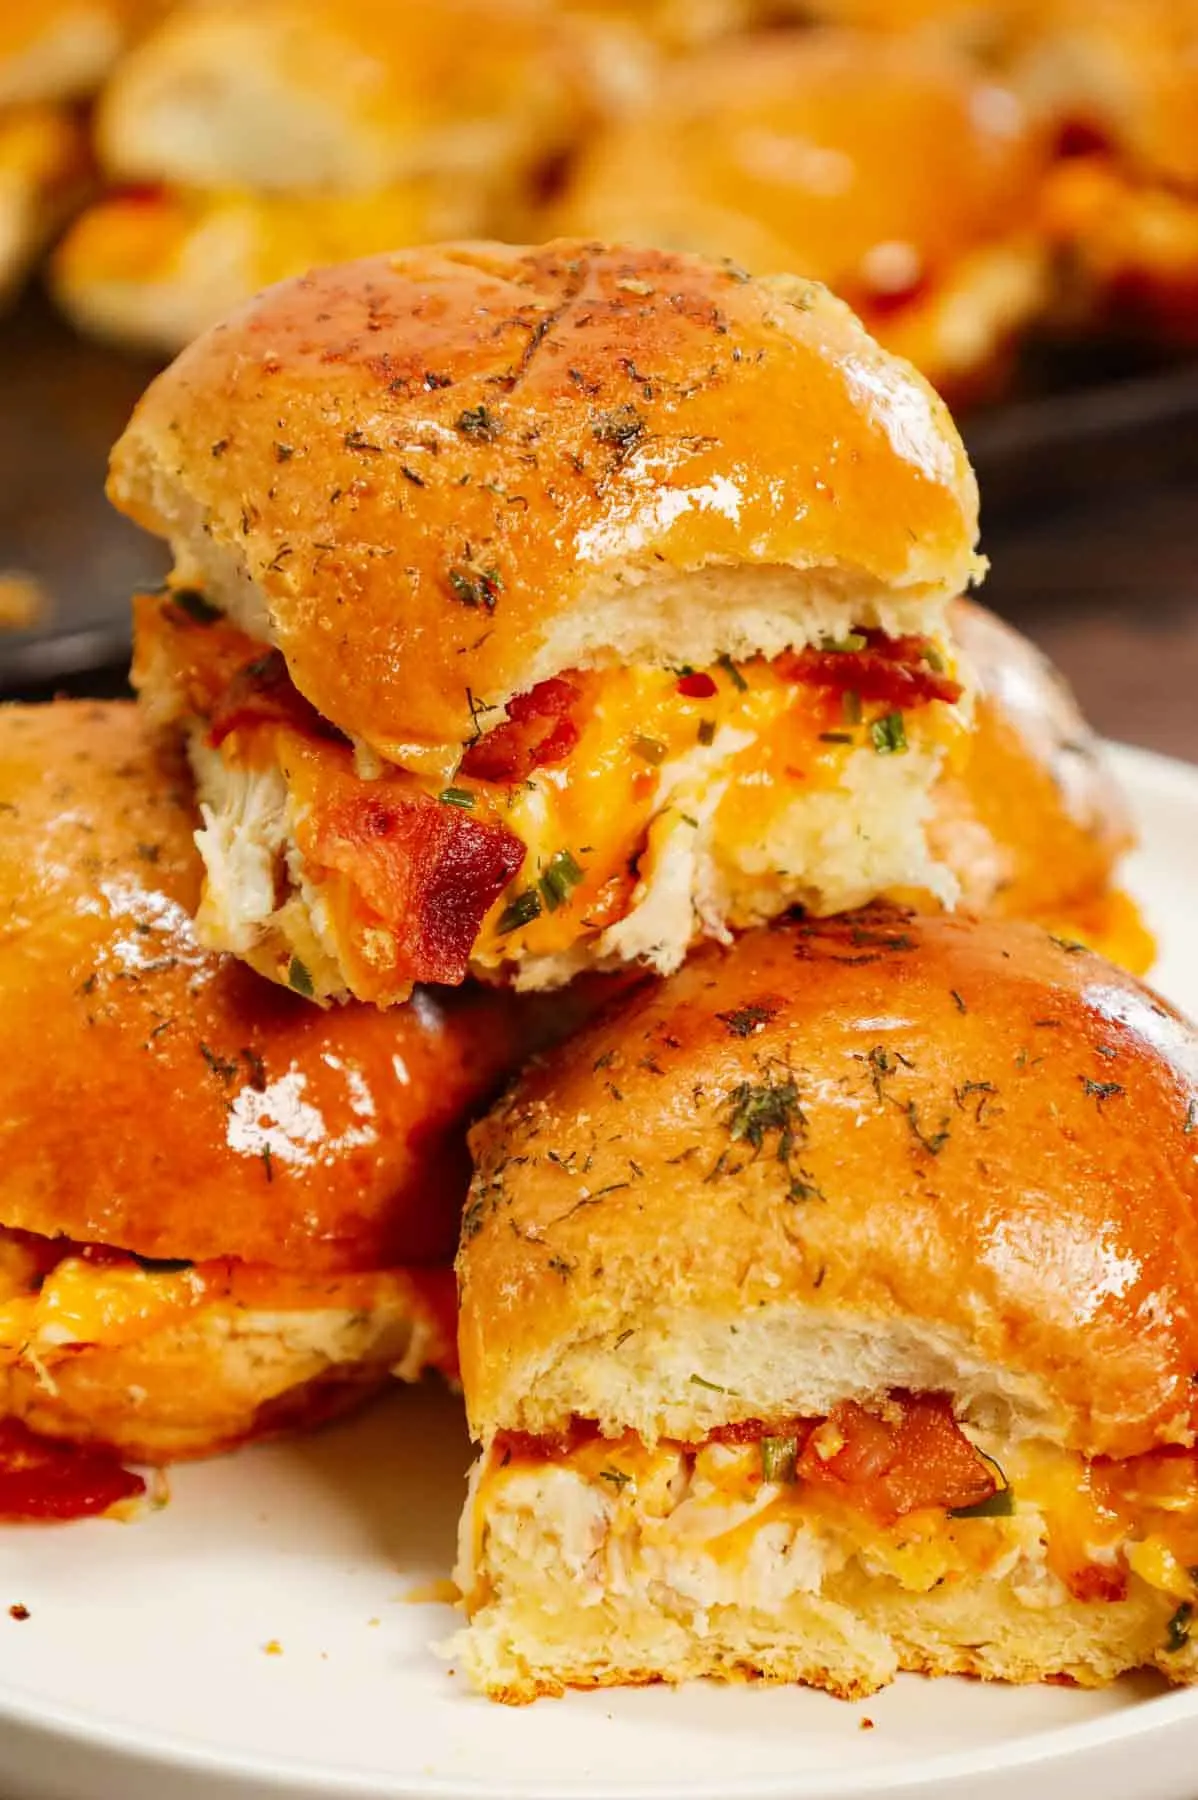 Chicken Bacon Ranch Sliders are the perfect handheld sandwich loaded with shredded rotisserie chicken, crumbled bacon, ranch dressing, chives and cheddar cheese.